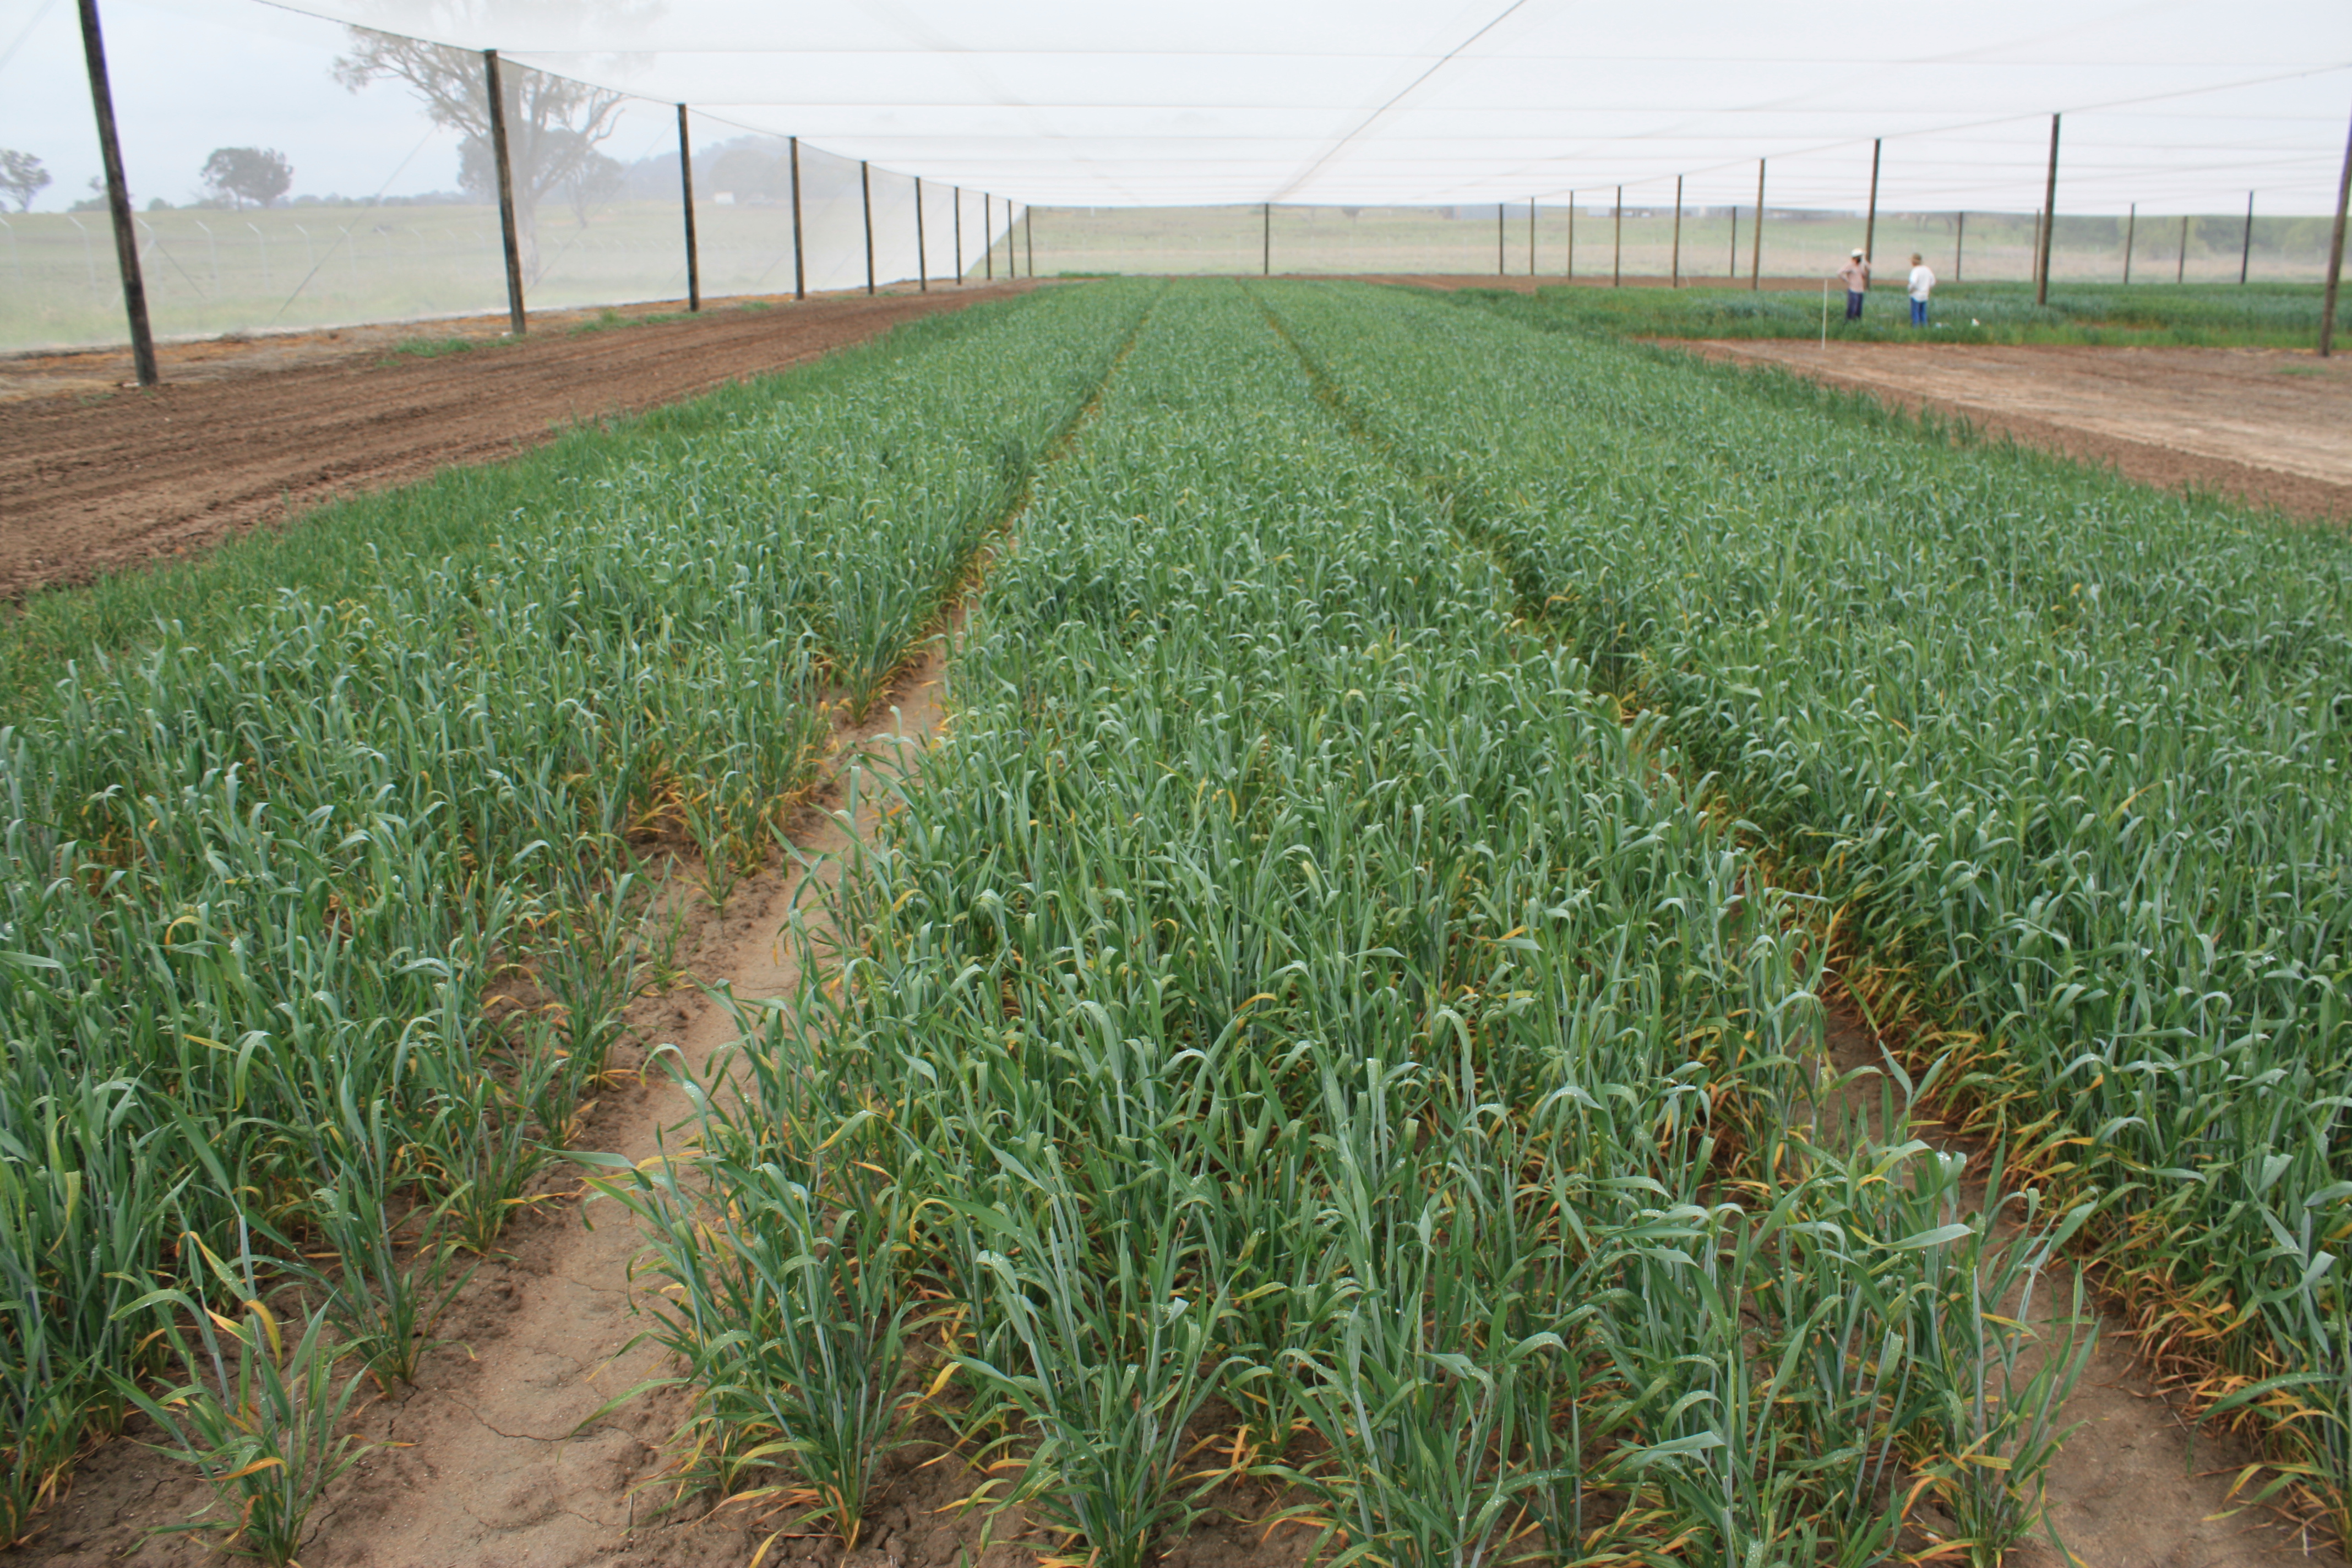 Rows of wheat growing in a greenhouse.